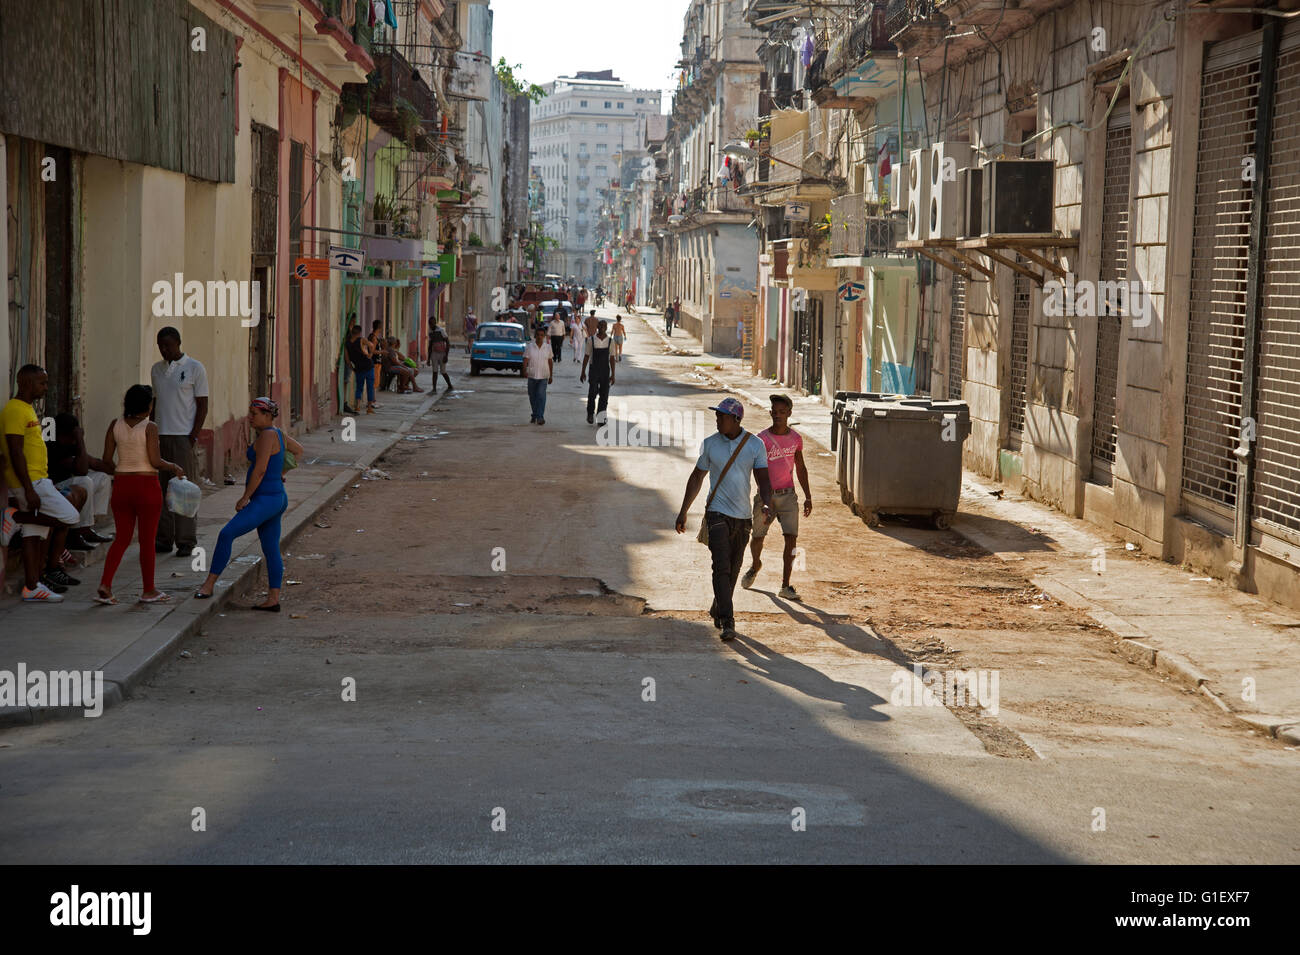 Cubans go about their daily lives in the crumbling buildings in Centro Havana Cuba Stock Photo